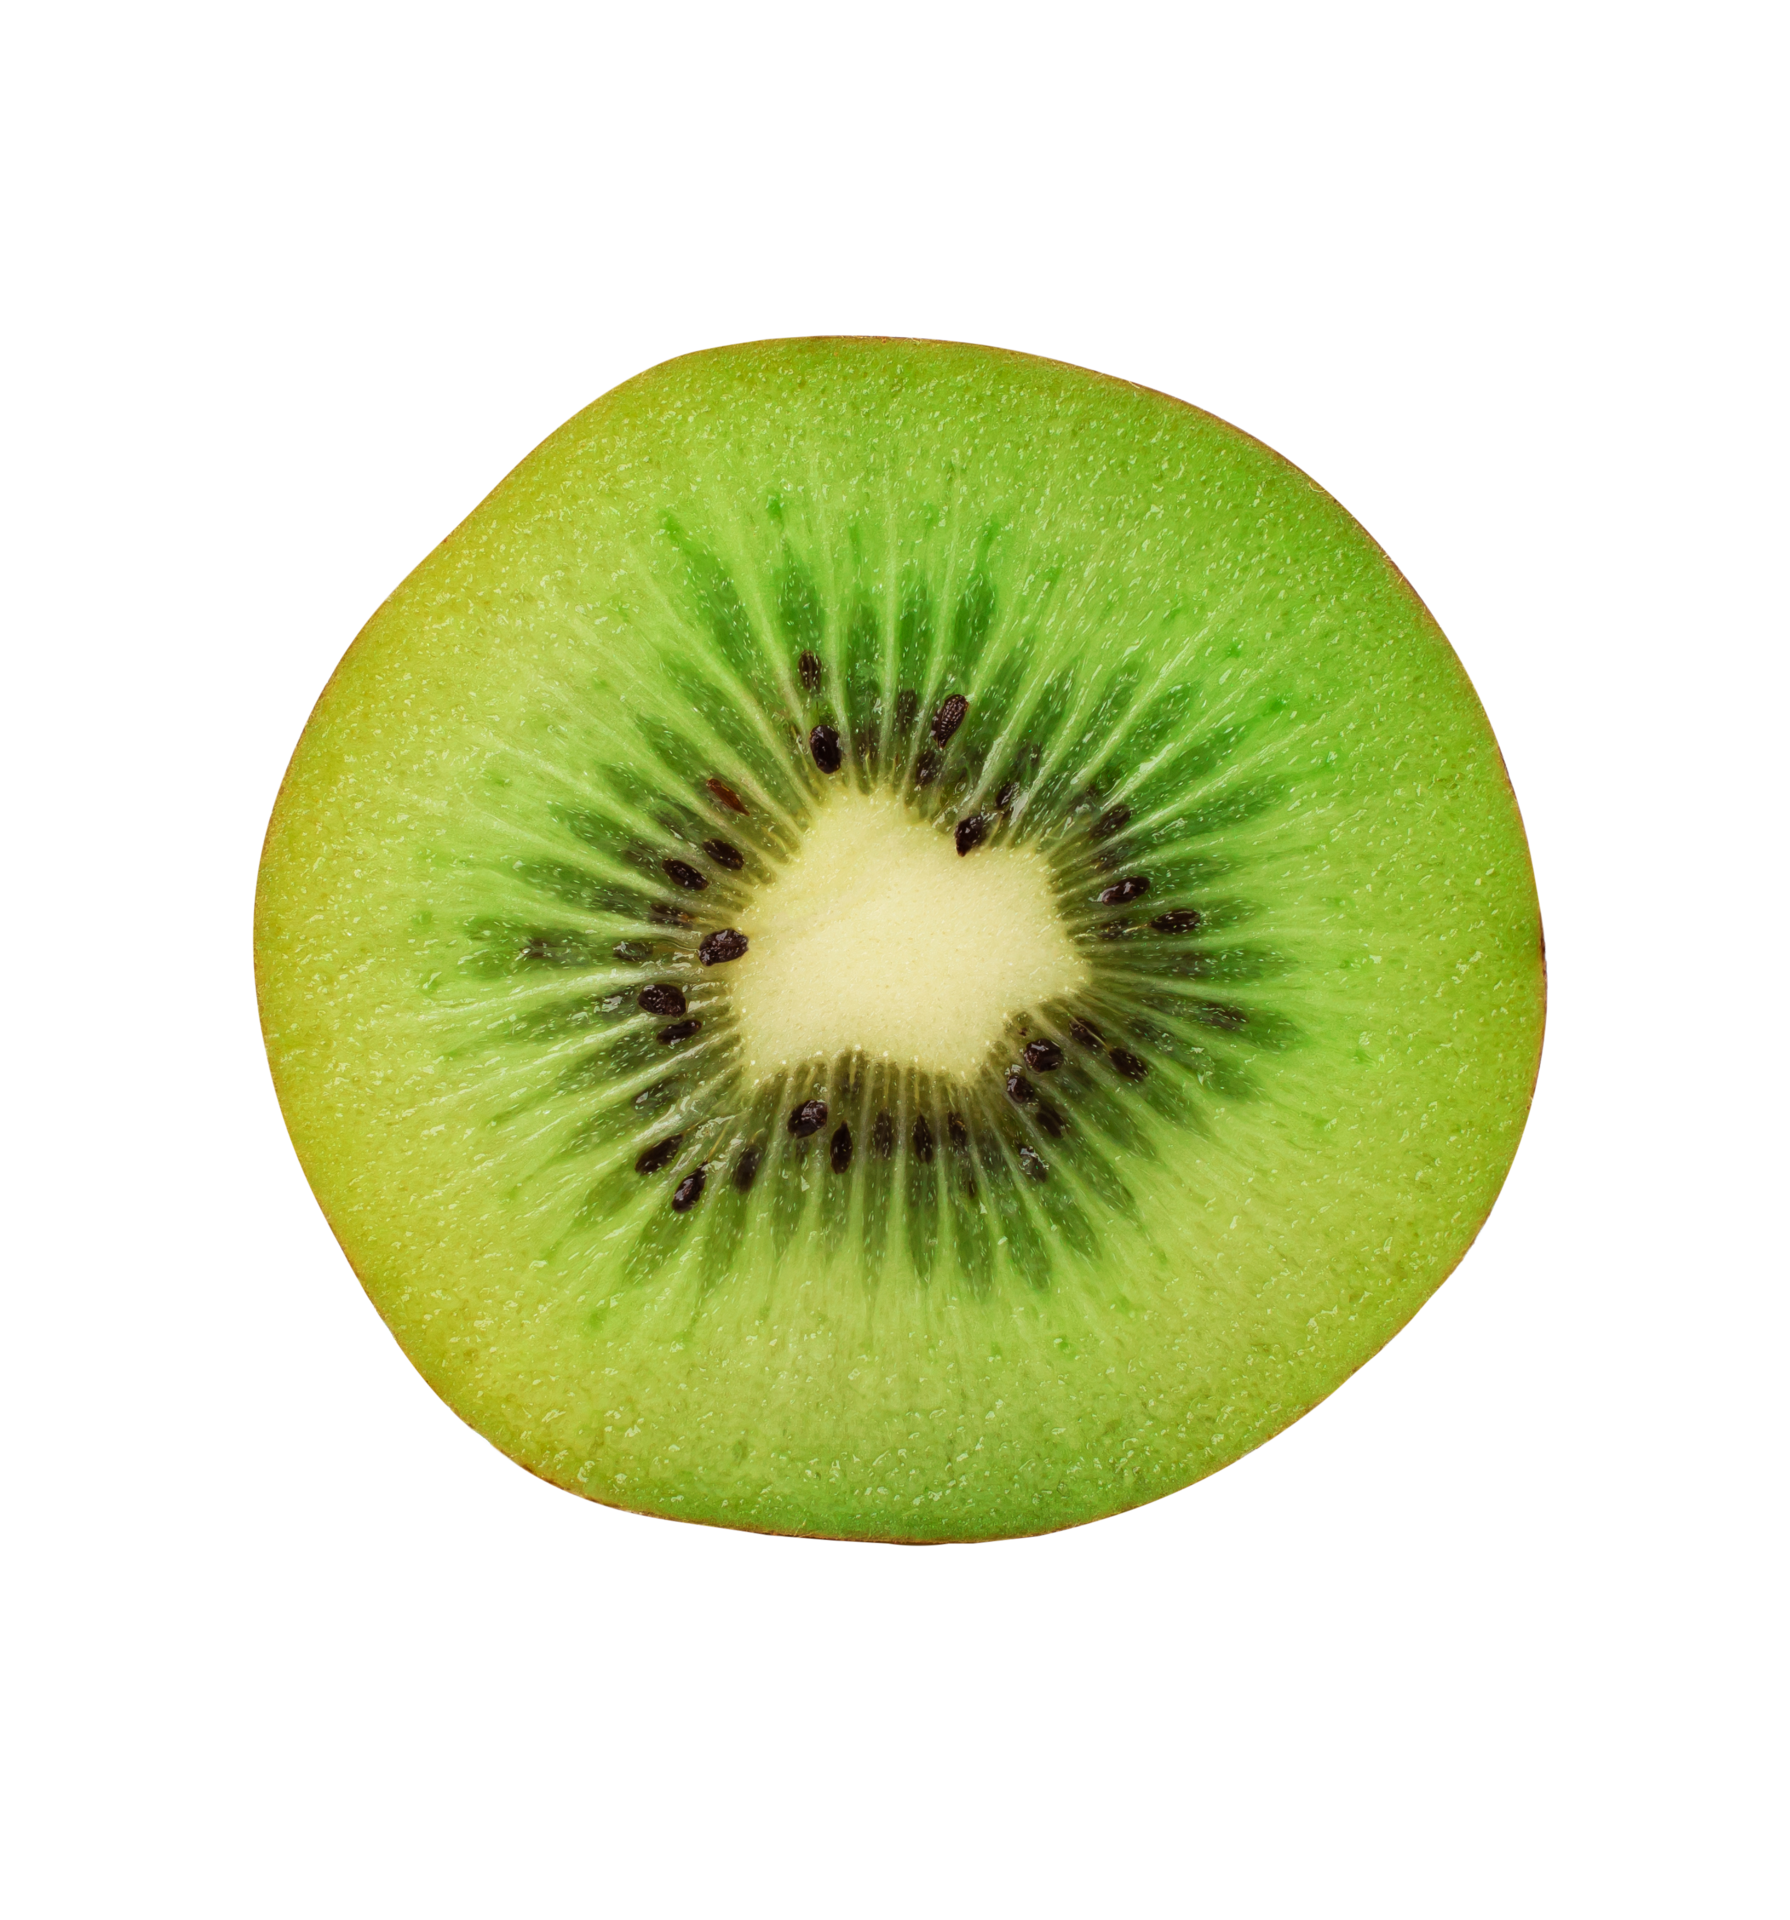 https://static.vecteezy.com/system/resources/previews/010/987/475/original/half-of-ripe-green-kiwi-isolated-on-white-background-with-clipping-path-png.png